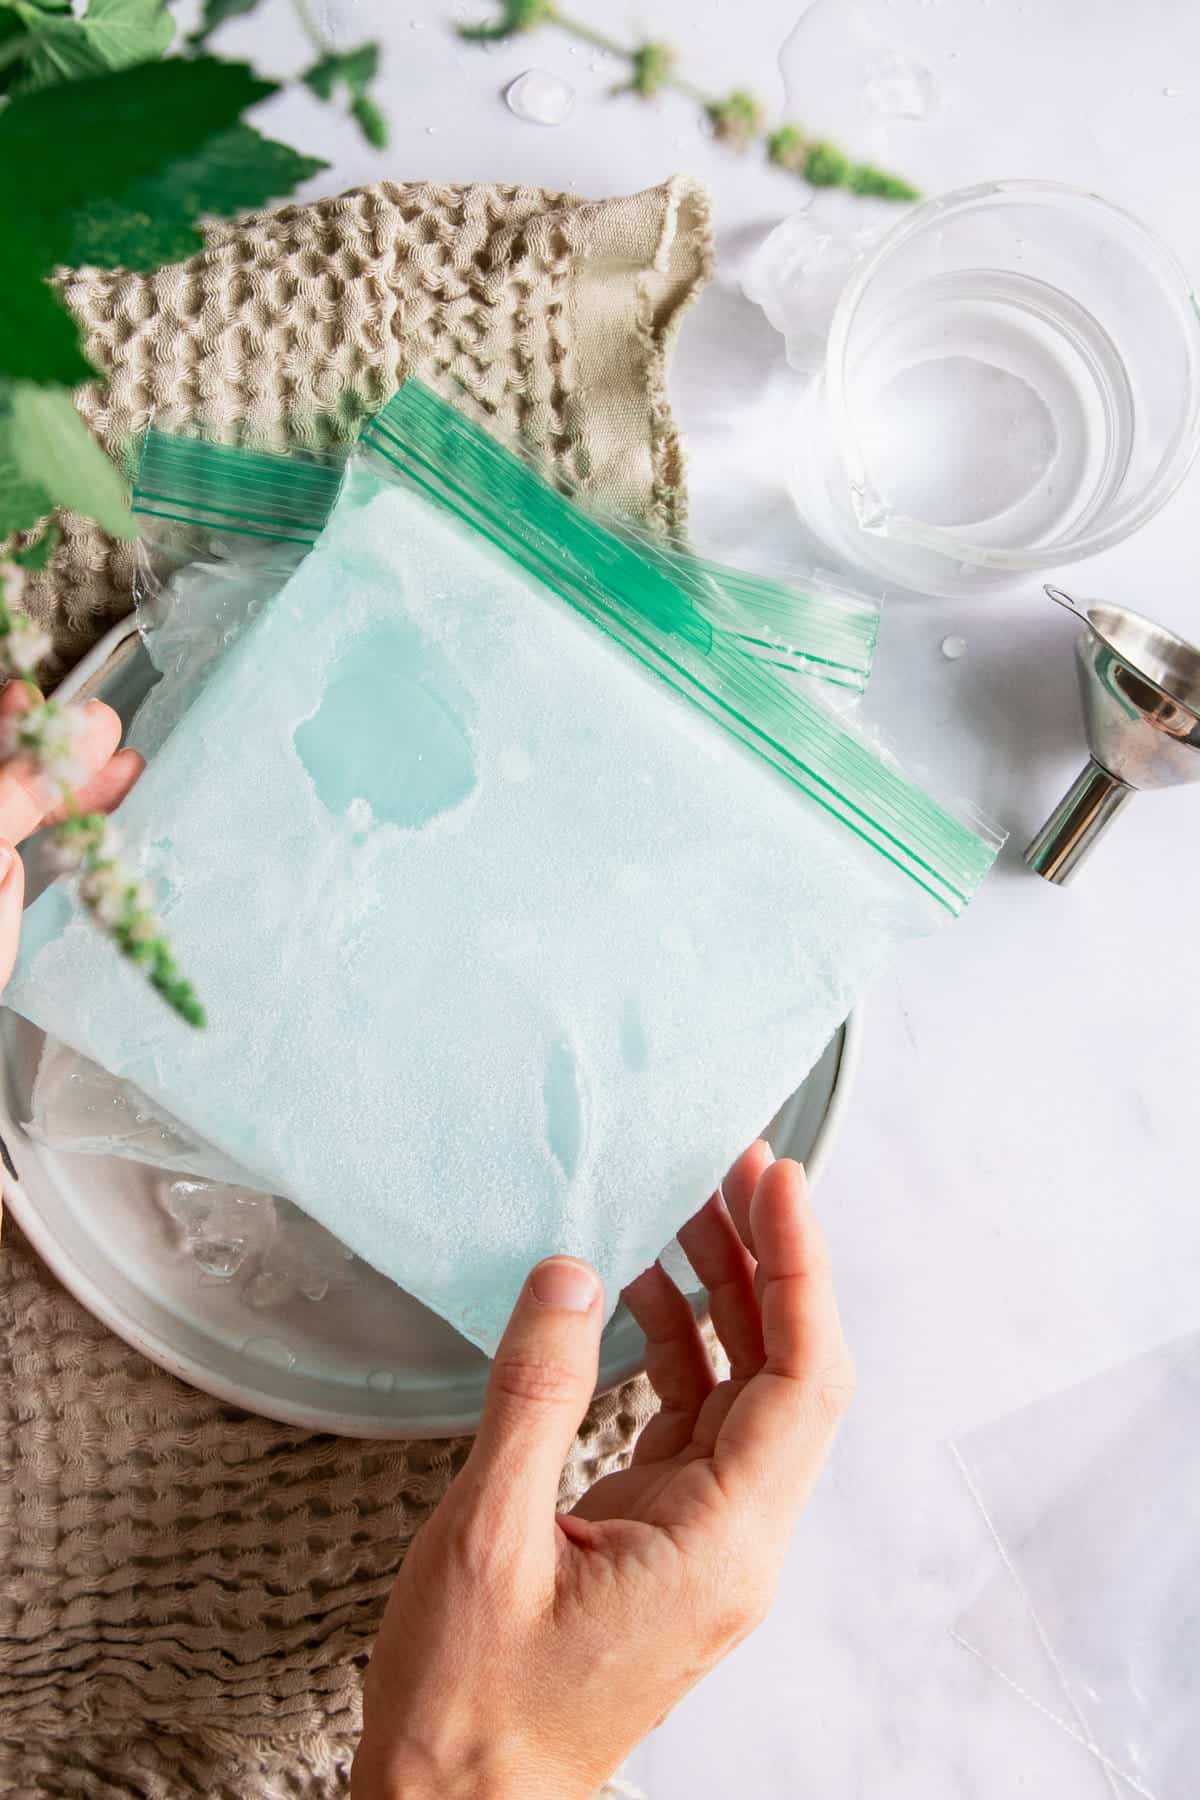 Lie ice pack flat to freeze